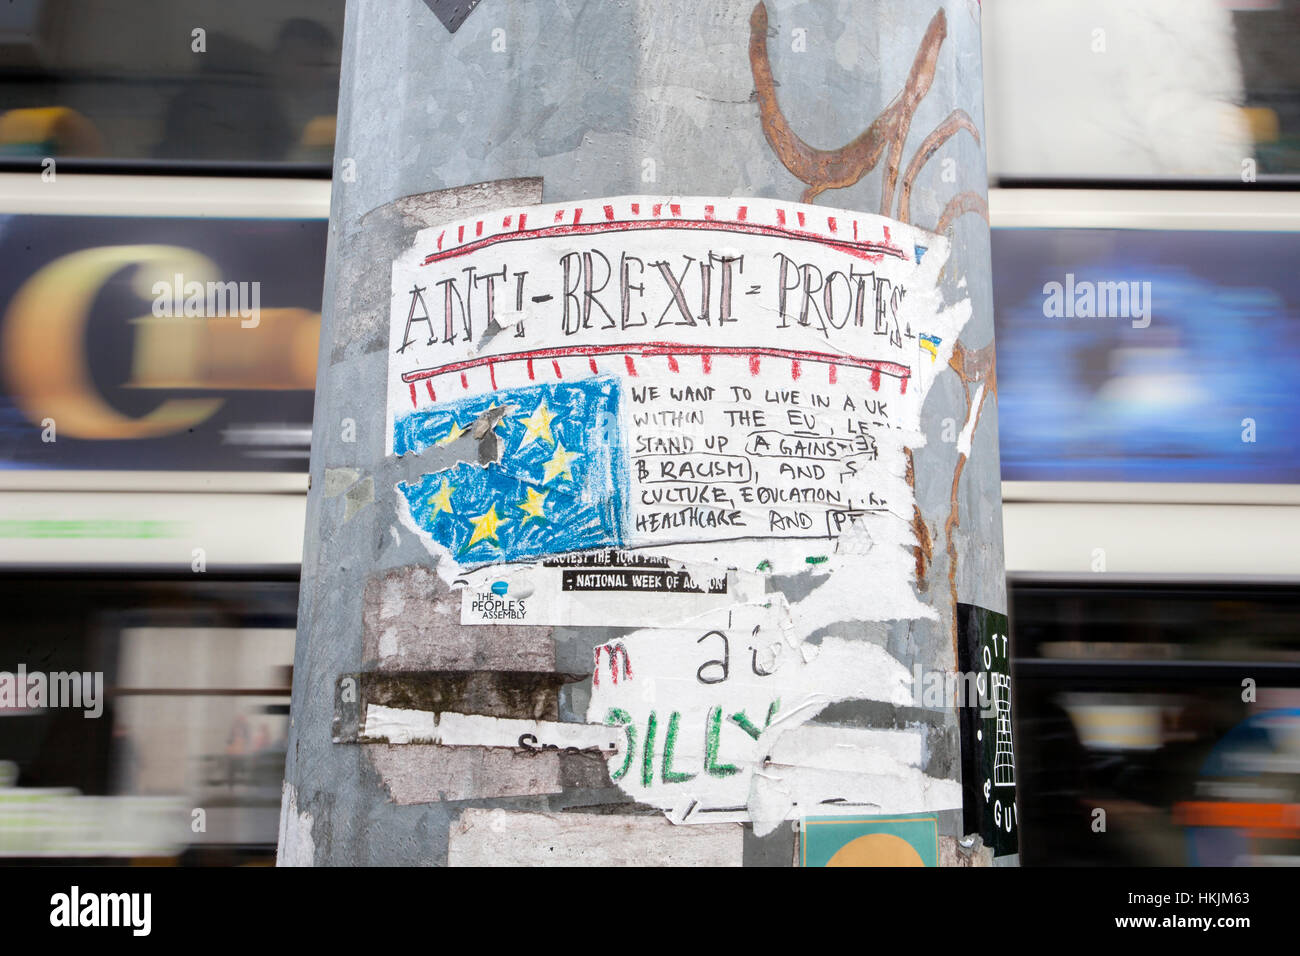 Anti-Brexit sticker fixed to lamp post in Manchester, Call for Action with stickers in Manchester, UK Stock Photo